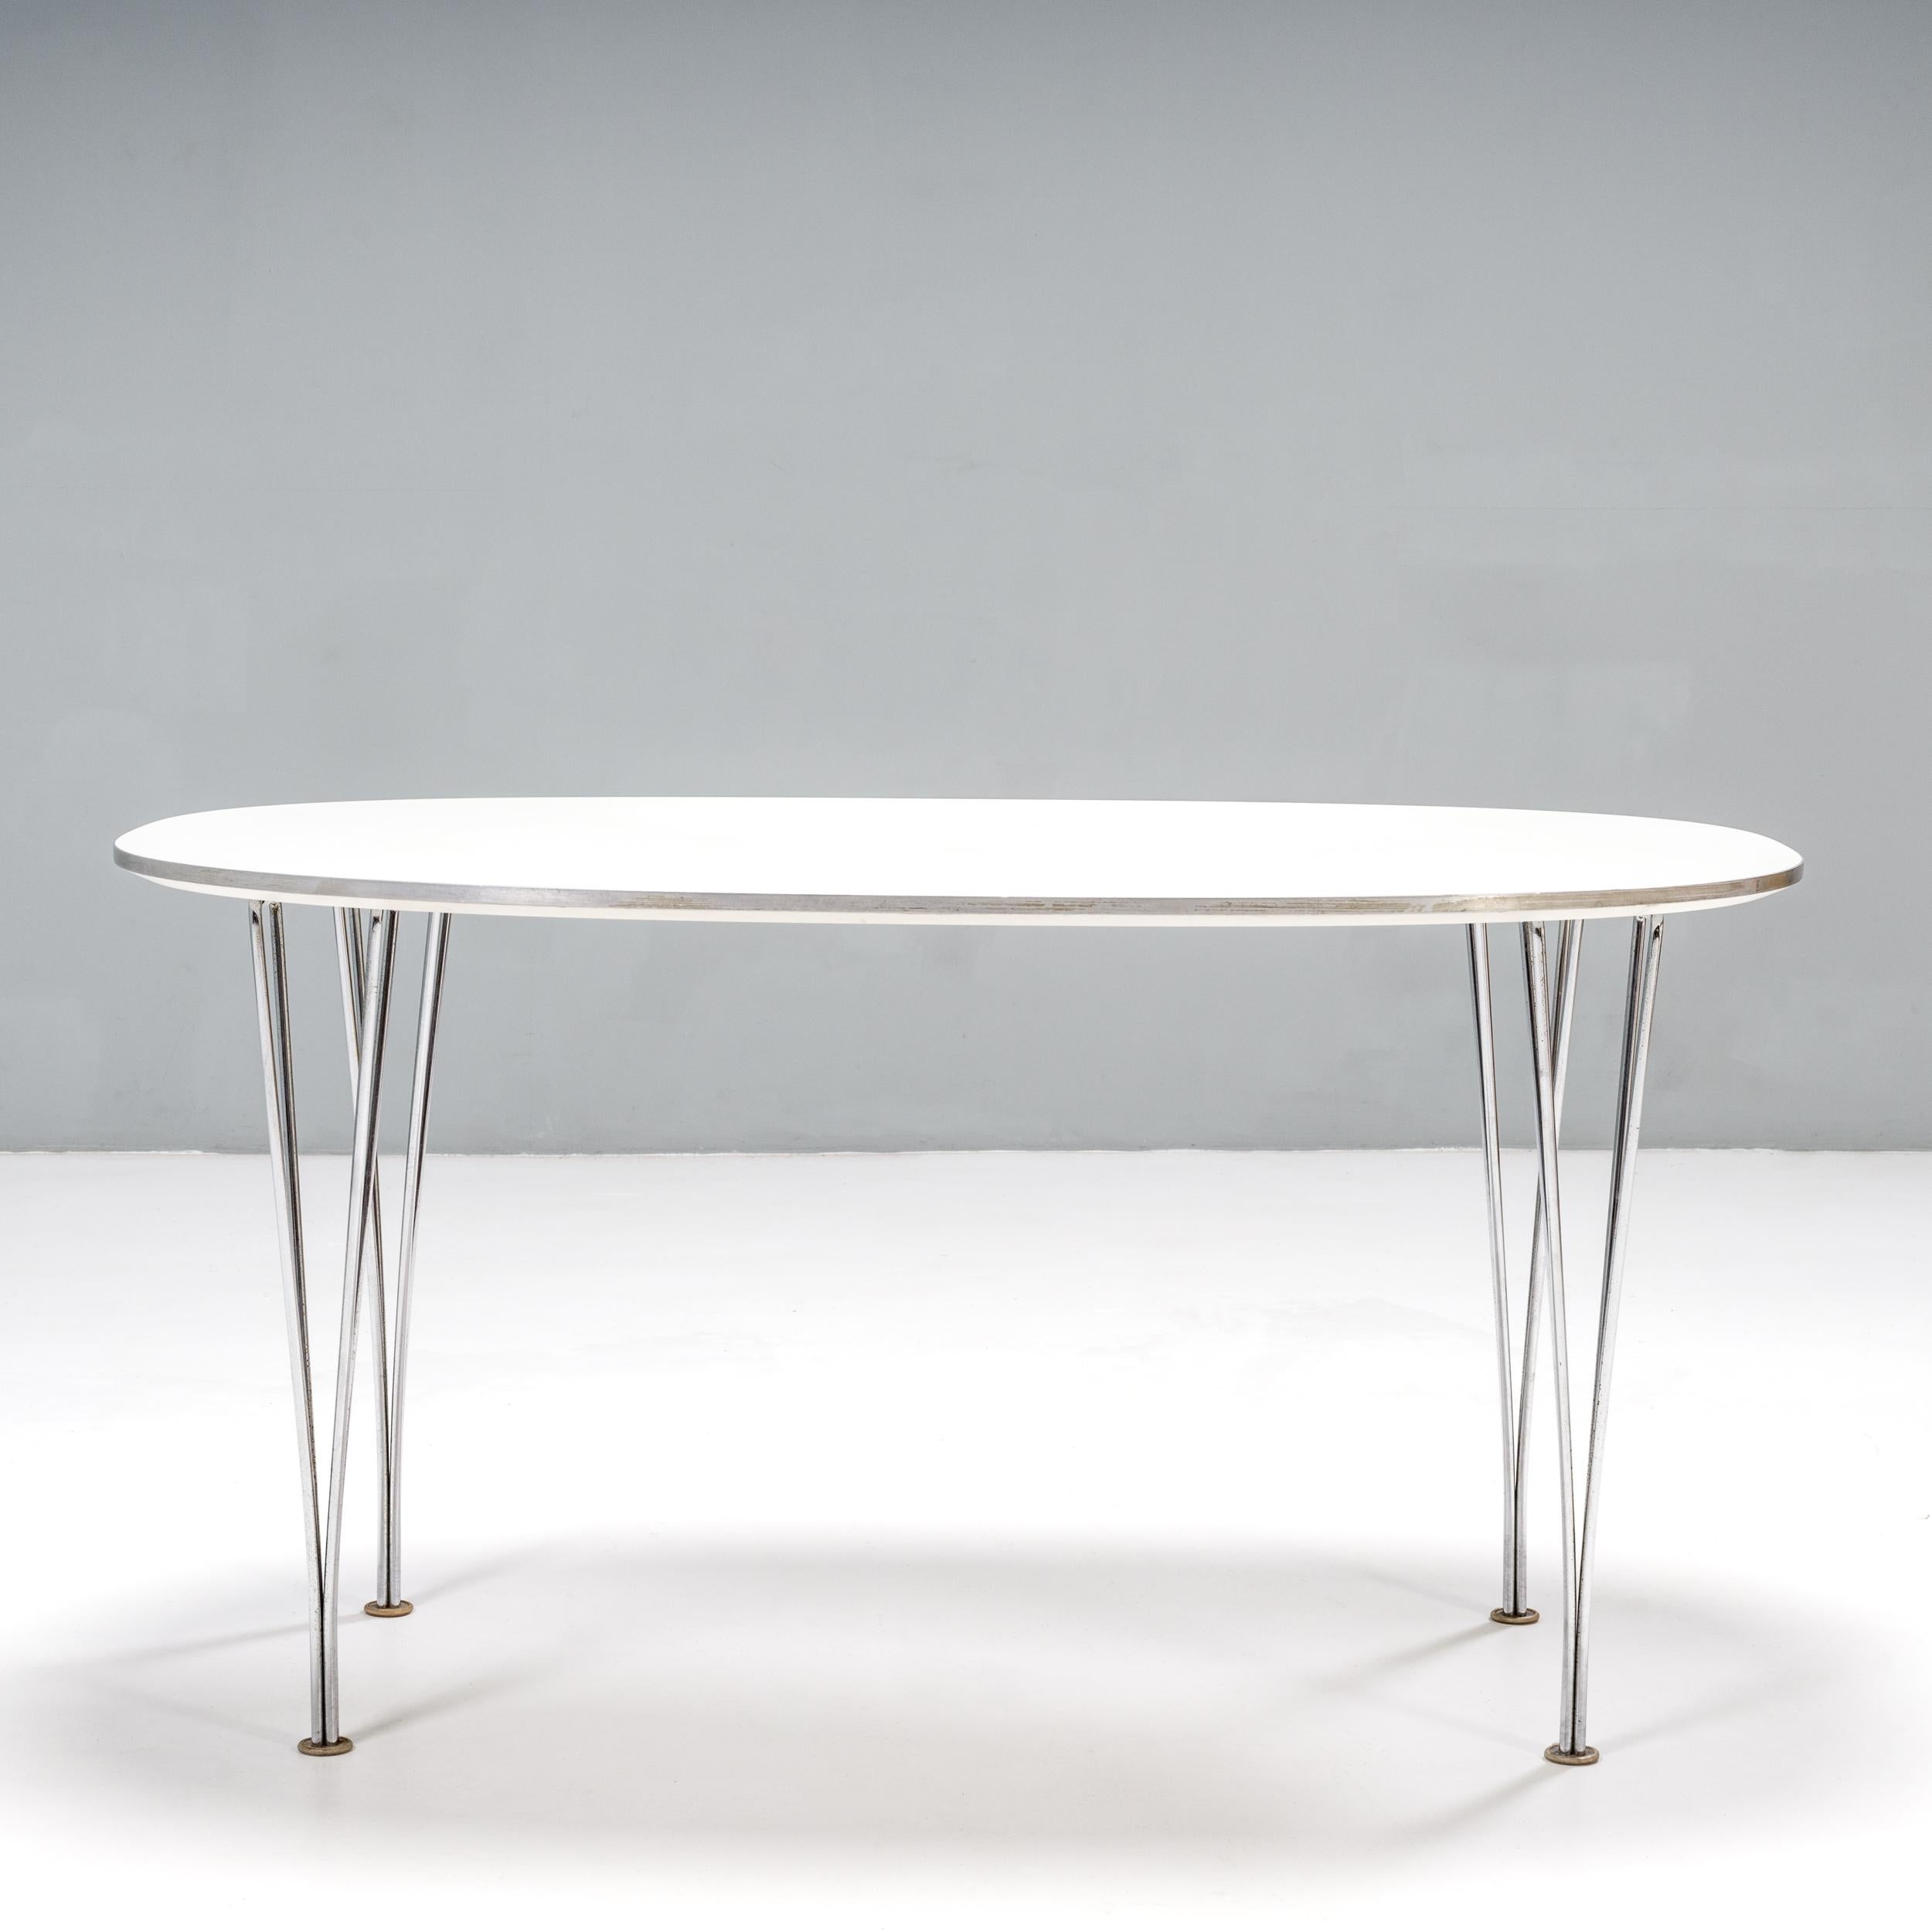 Originally designed by Piet Hein and Bruno Mathsson in 1966, this Super-Ellipitic table remains a contemporary piece of design.

Constructed with a white wood veneer top, the table sits on chromed steel legs and features rounded corners to create